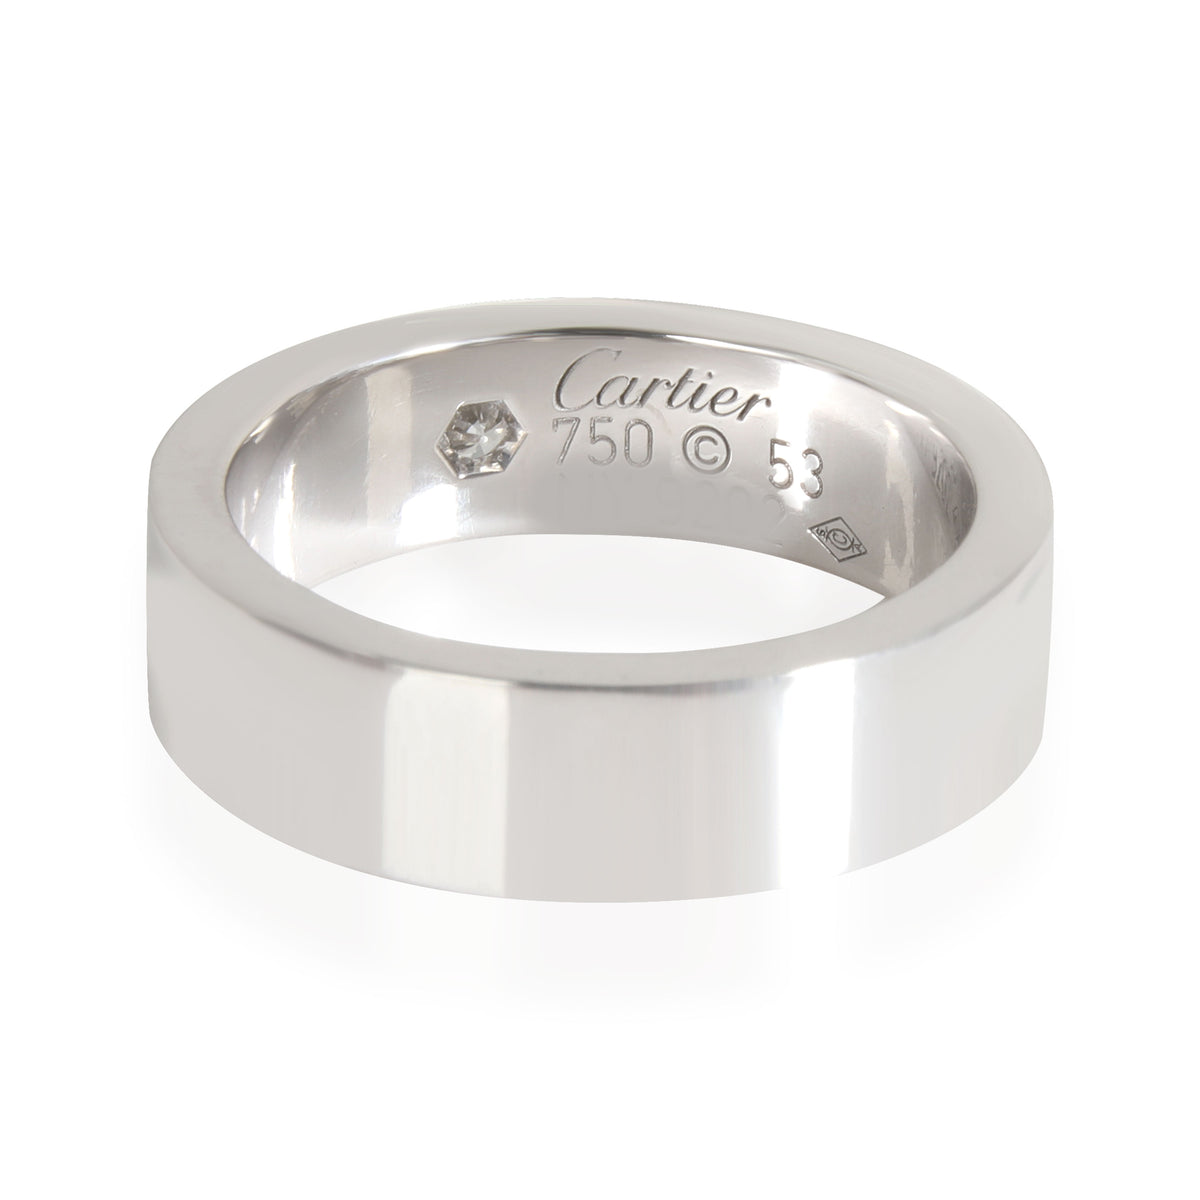 Cartier Love Diamond Band in 18k White Gold 0.06 CTW